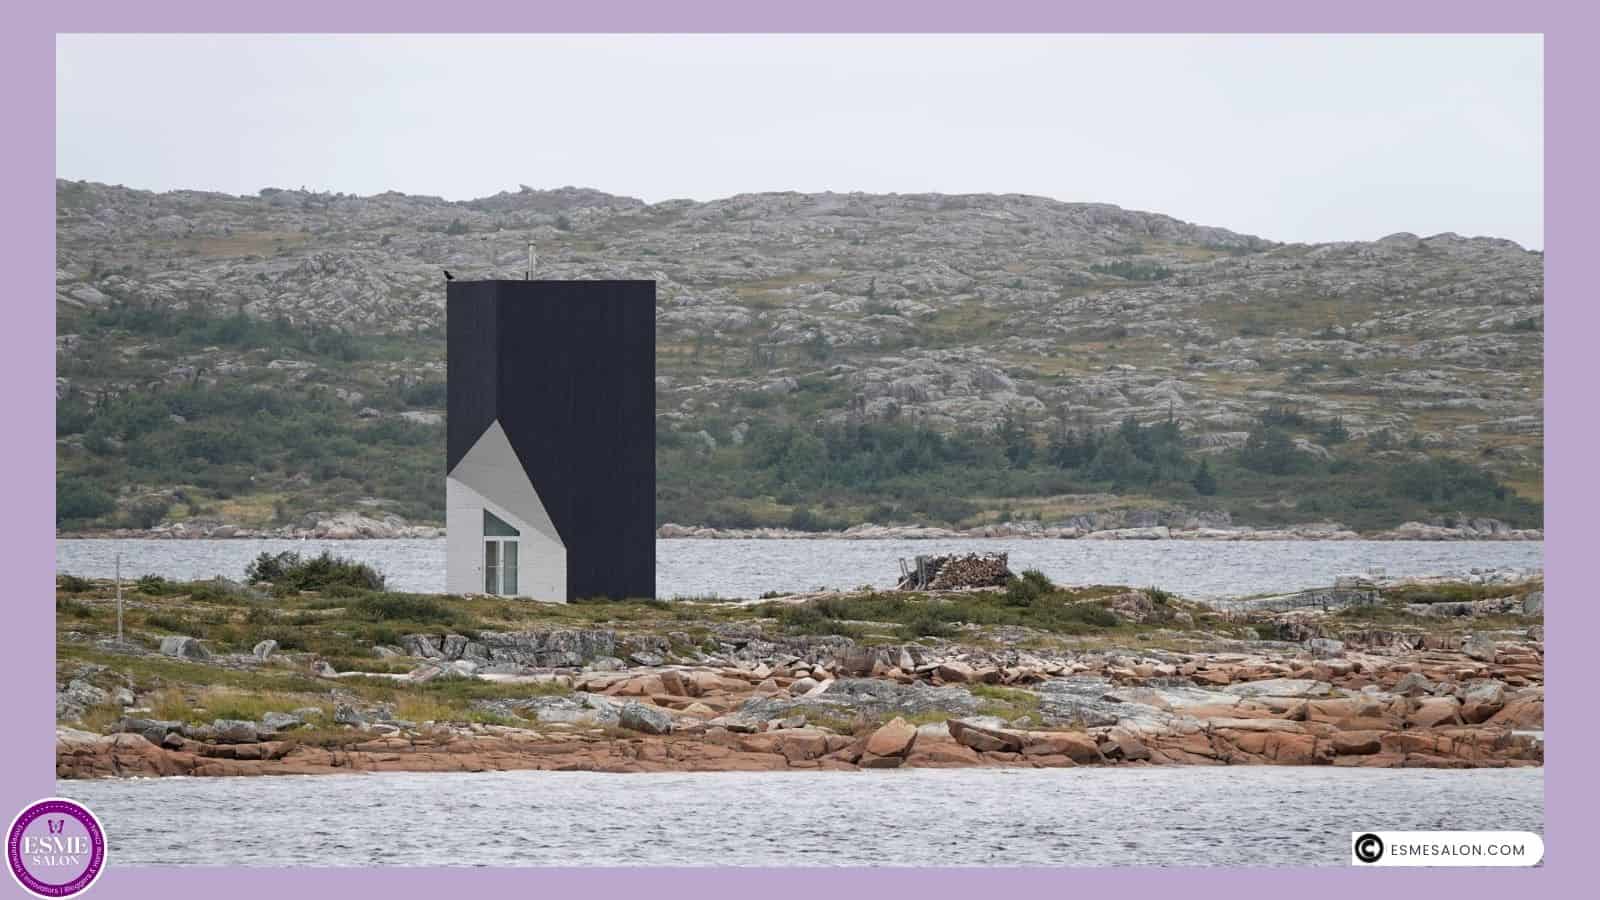 an image of a strange black building and believed to be a studio